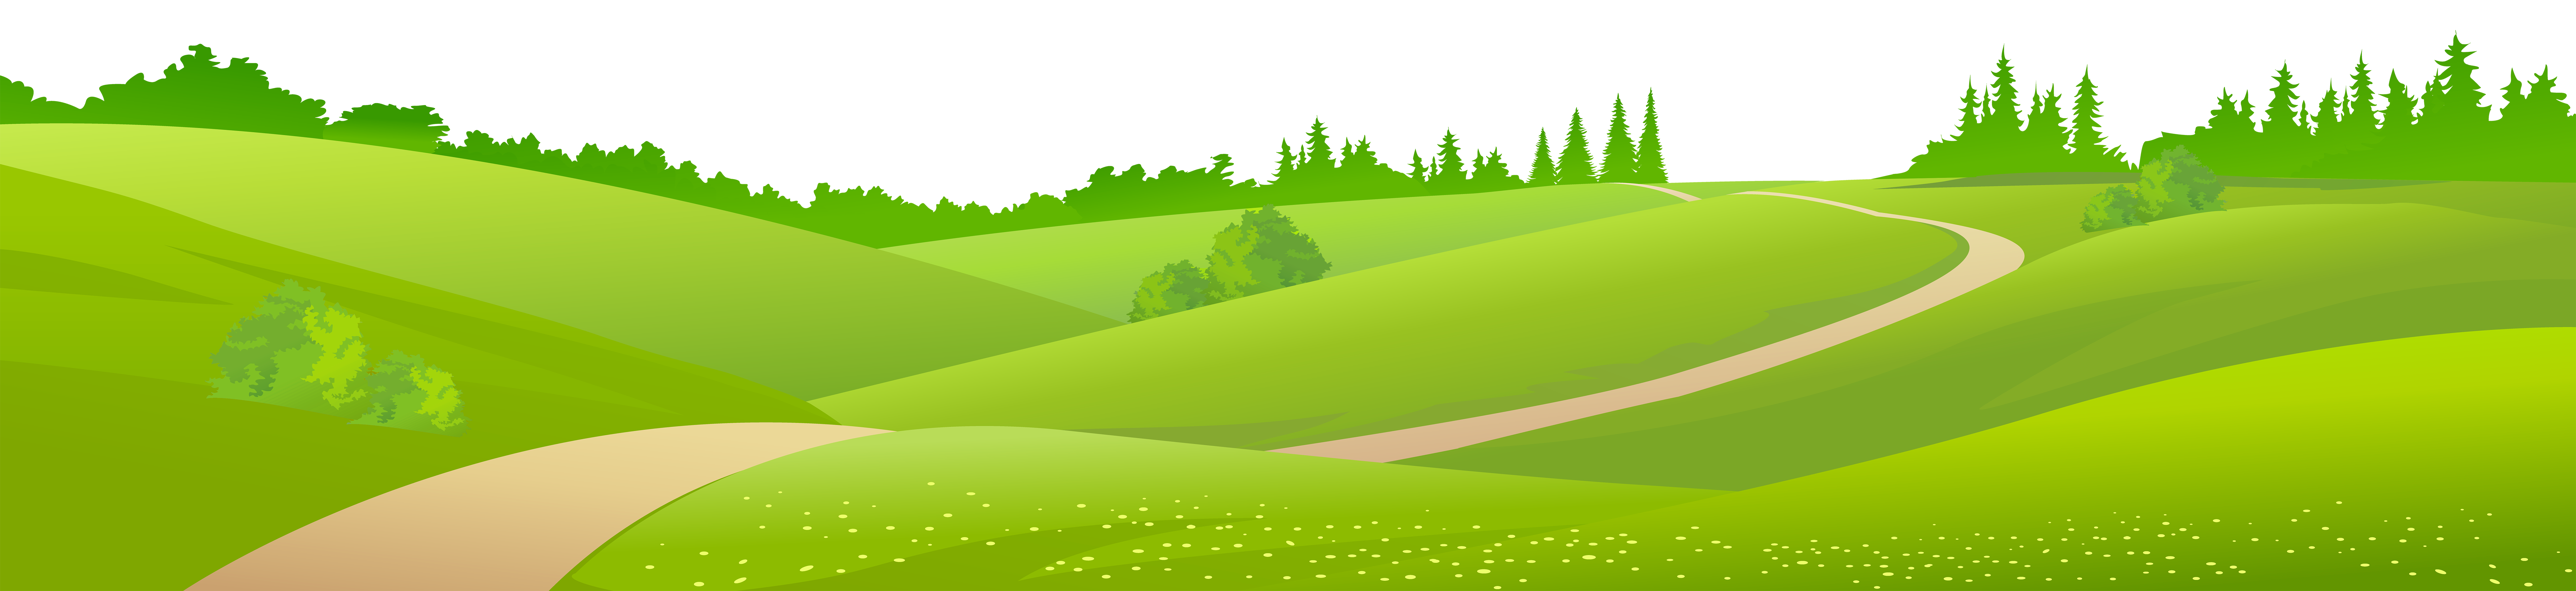 Path clipart valley. Trail ground transparent png